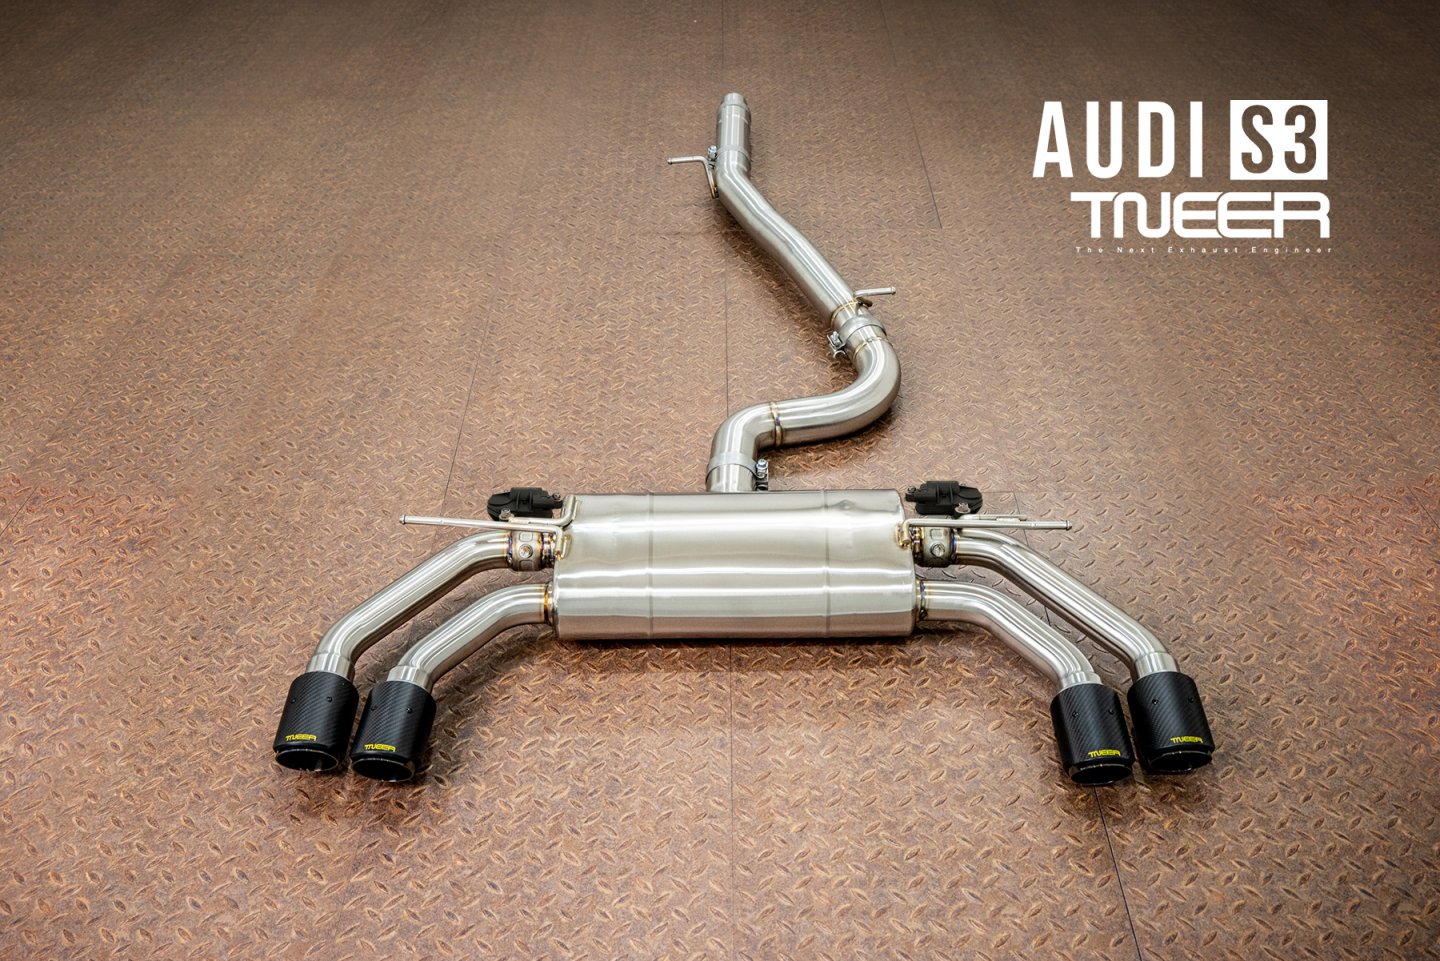 Audi Q2 35TFSI TNEER Exhaust System with TACS